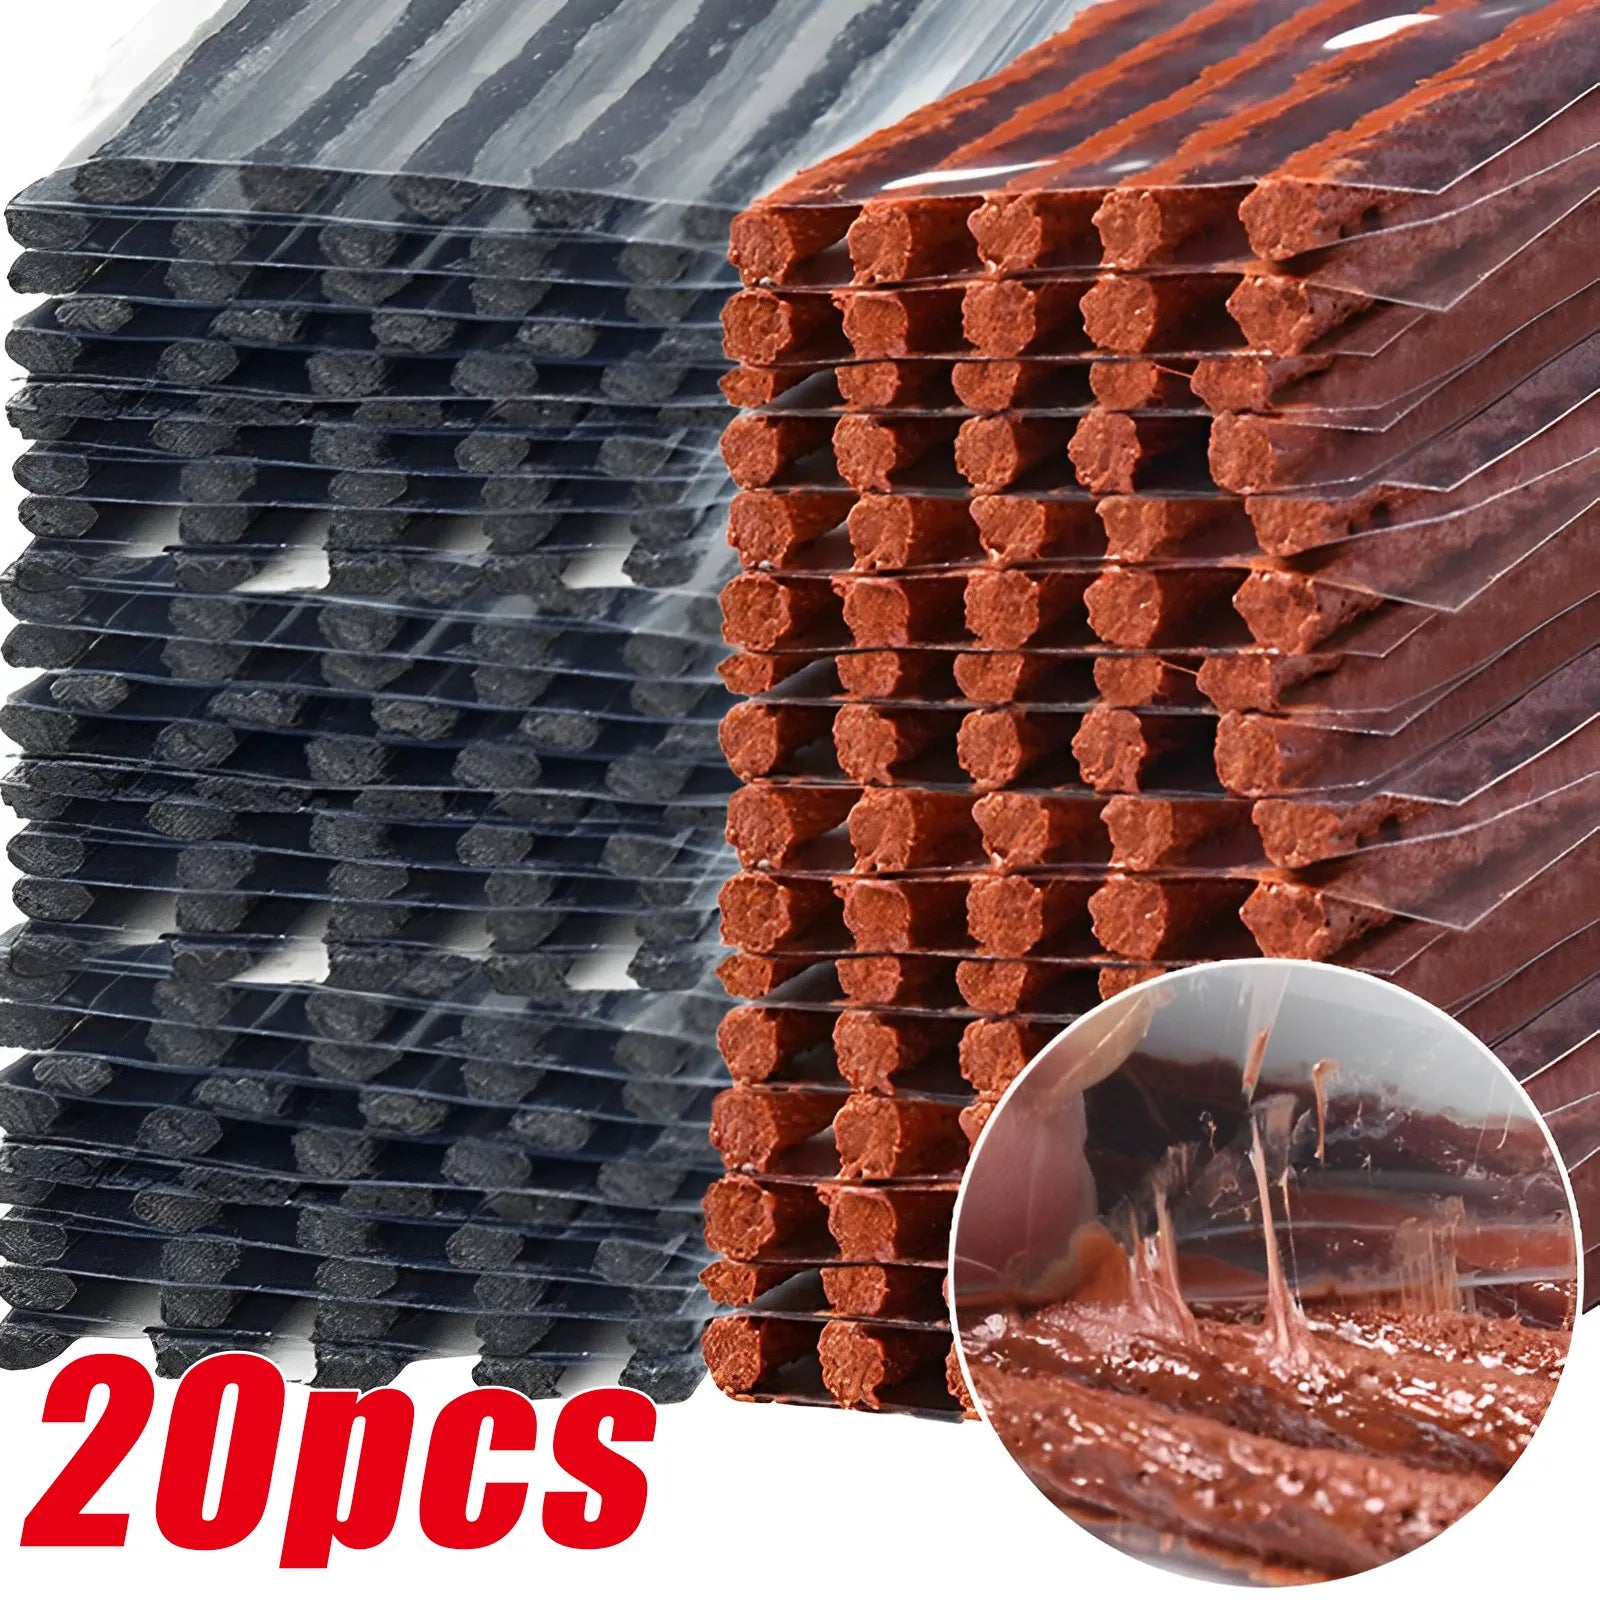 Tubeless Tire Repair Strips Stiring Glue for Tyre Puncture Emergency Car Motorcycle Bike Tyre Tire Rubber Strips Repairing Tools